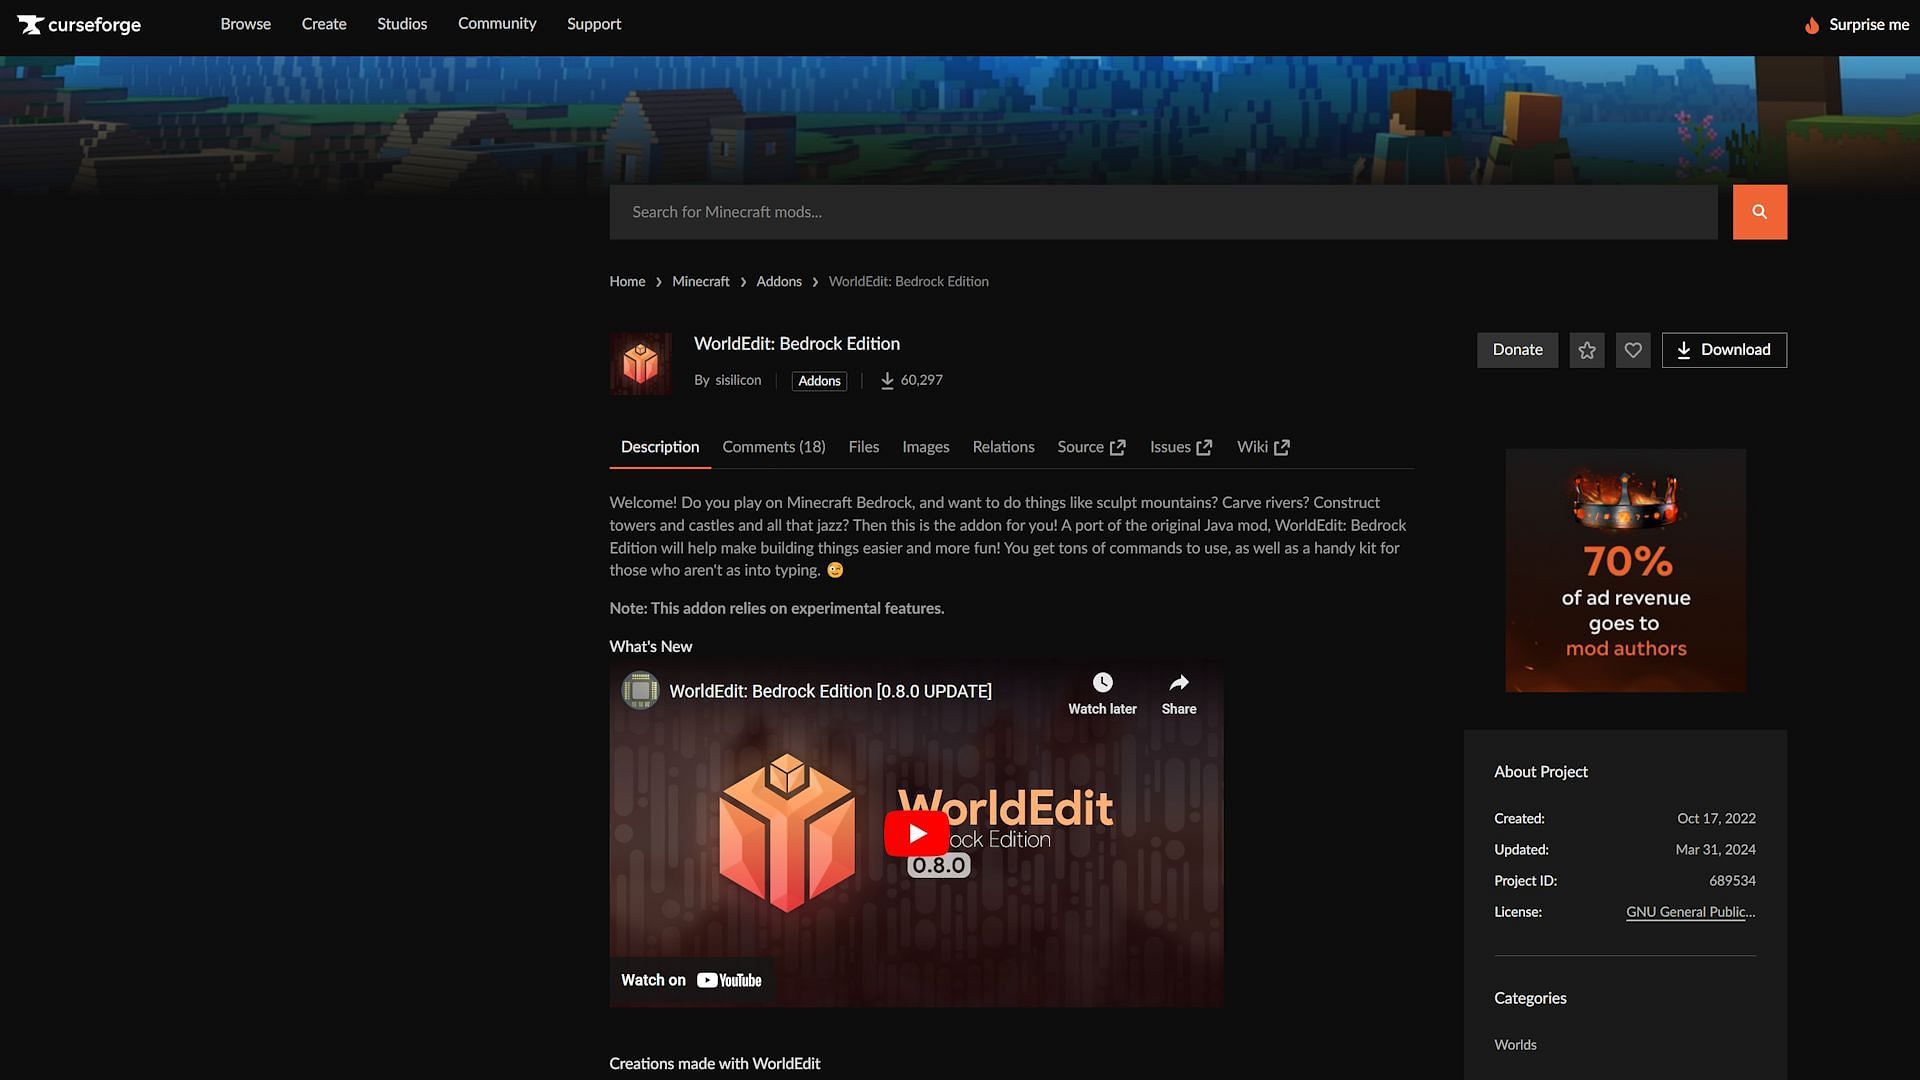 The page for WorldEdit: Bedrock Edition on CurseForge (Image via CurseForge)